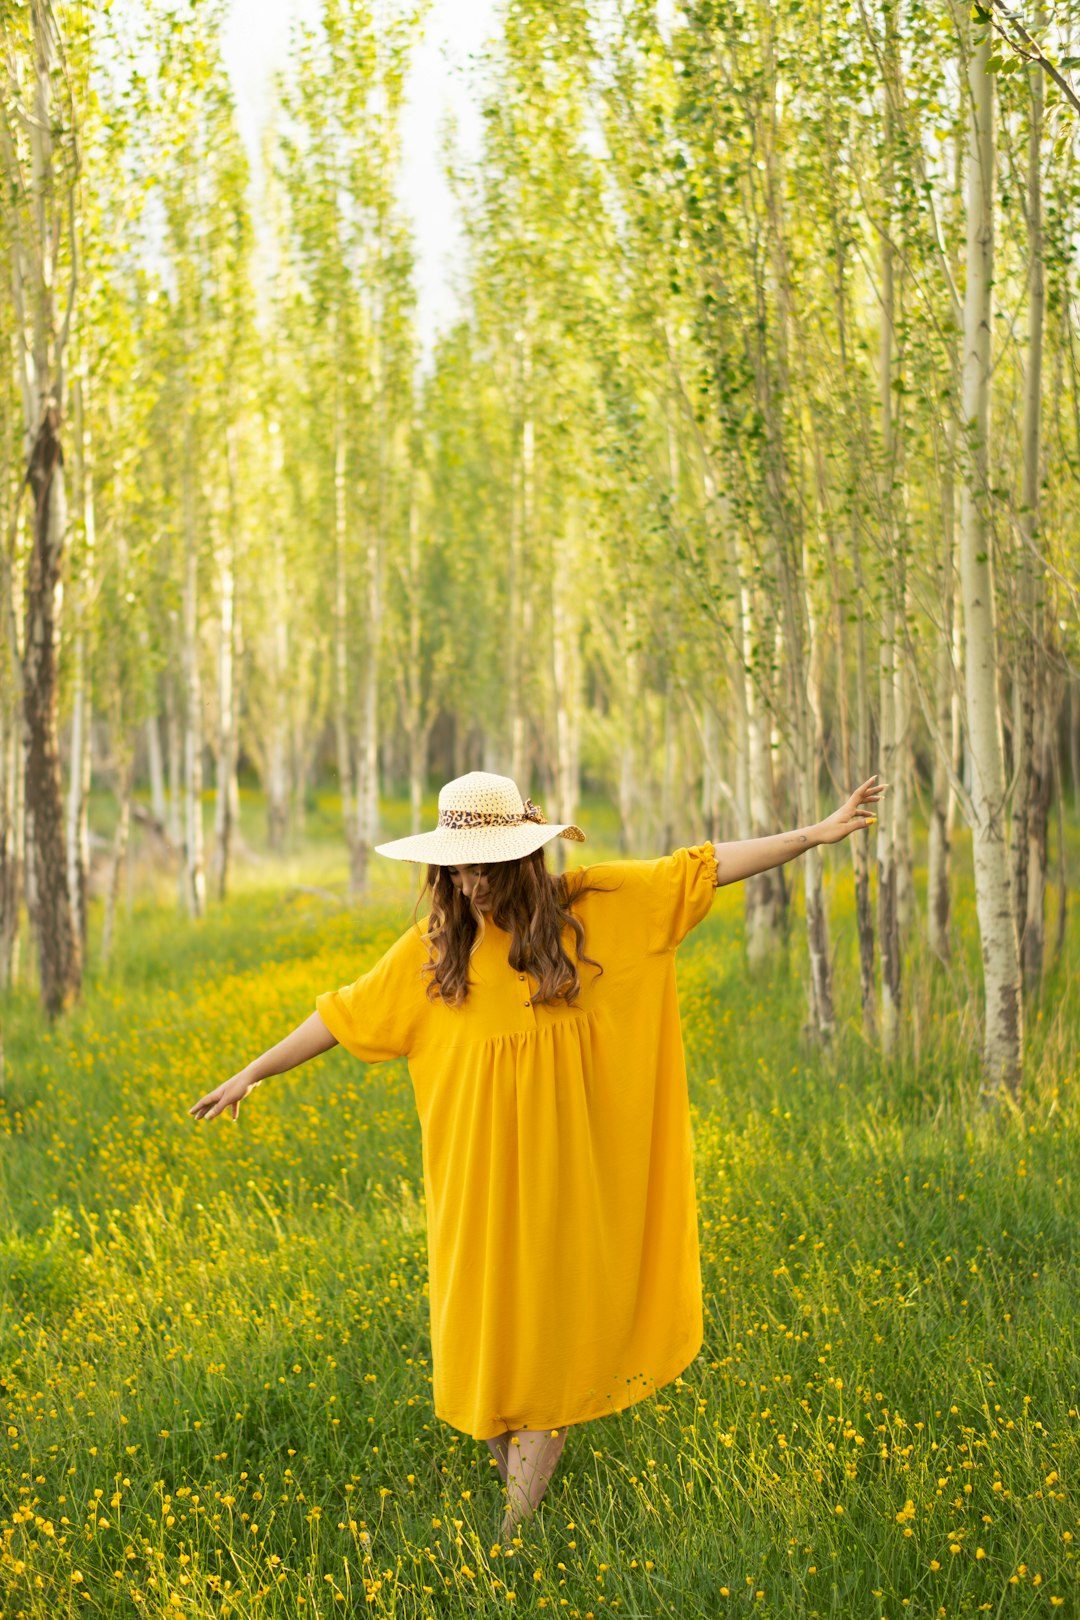 woman in yellow dress wearing brown hat standing on green grass field during daytime